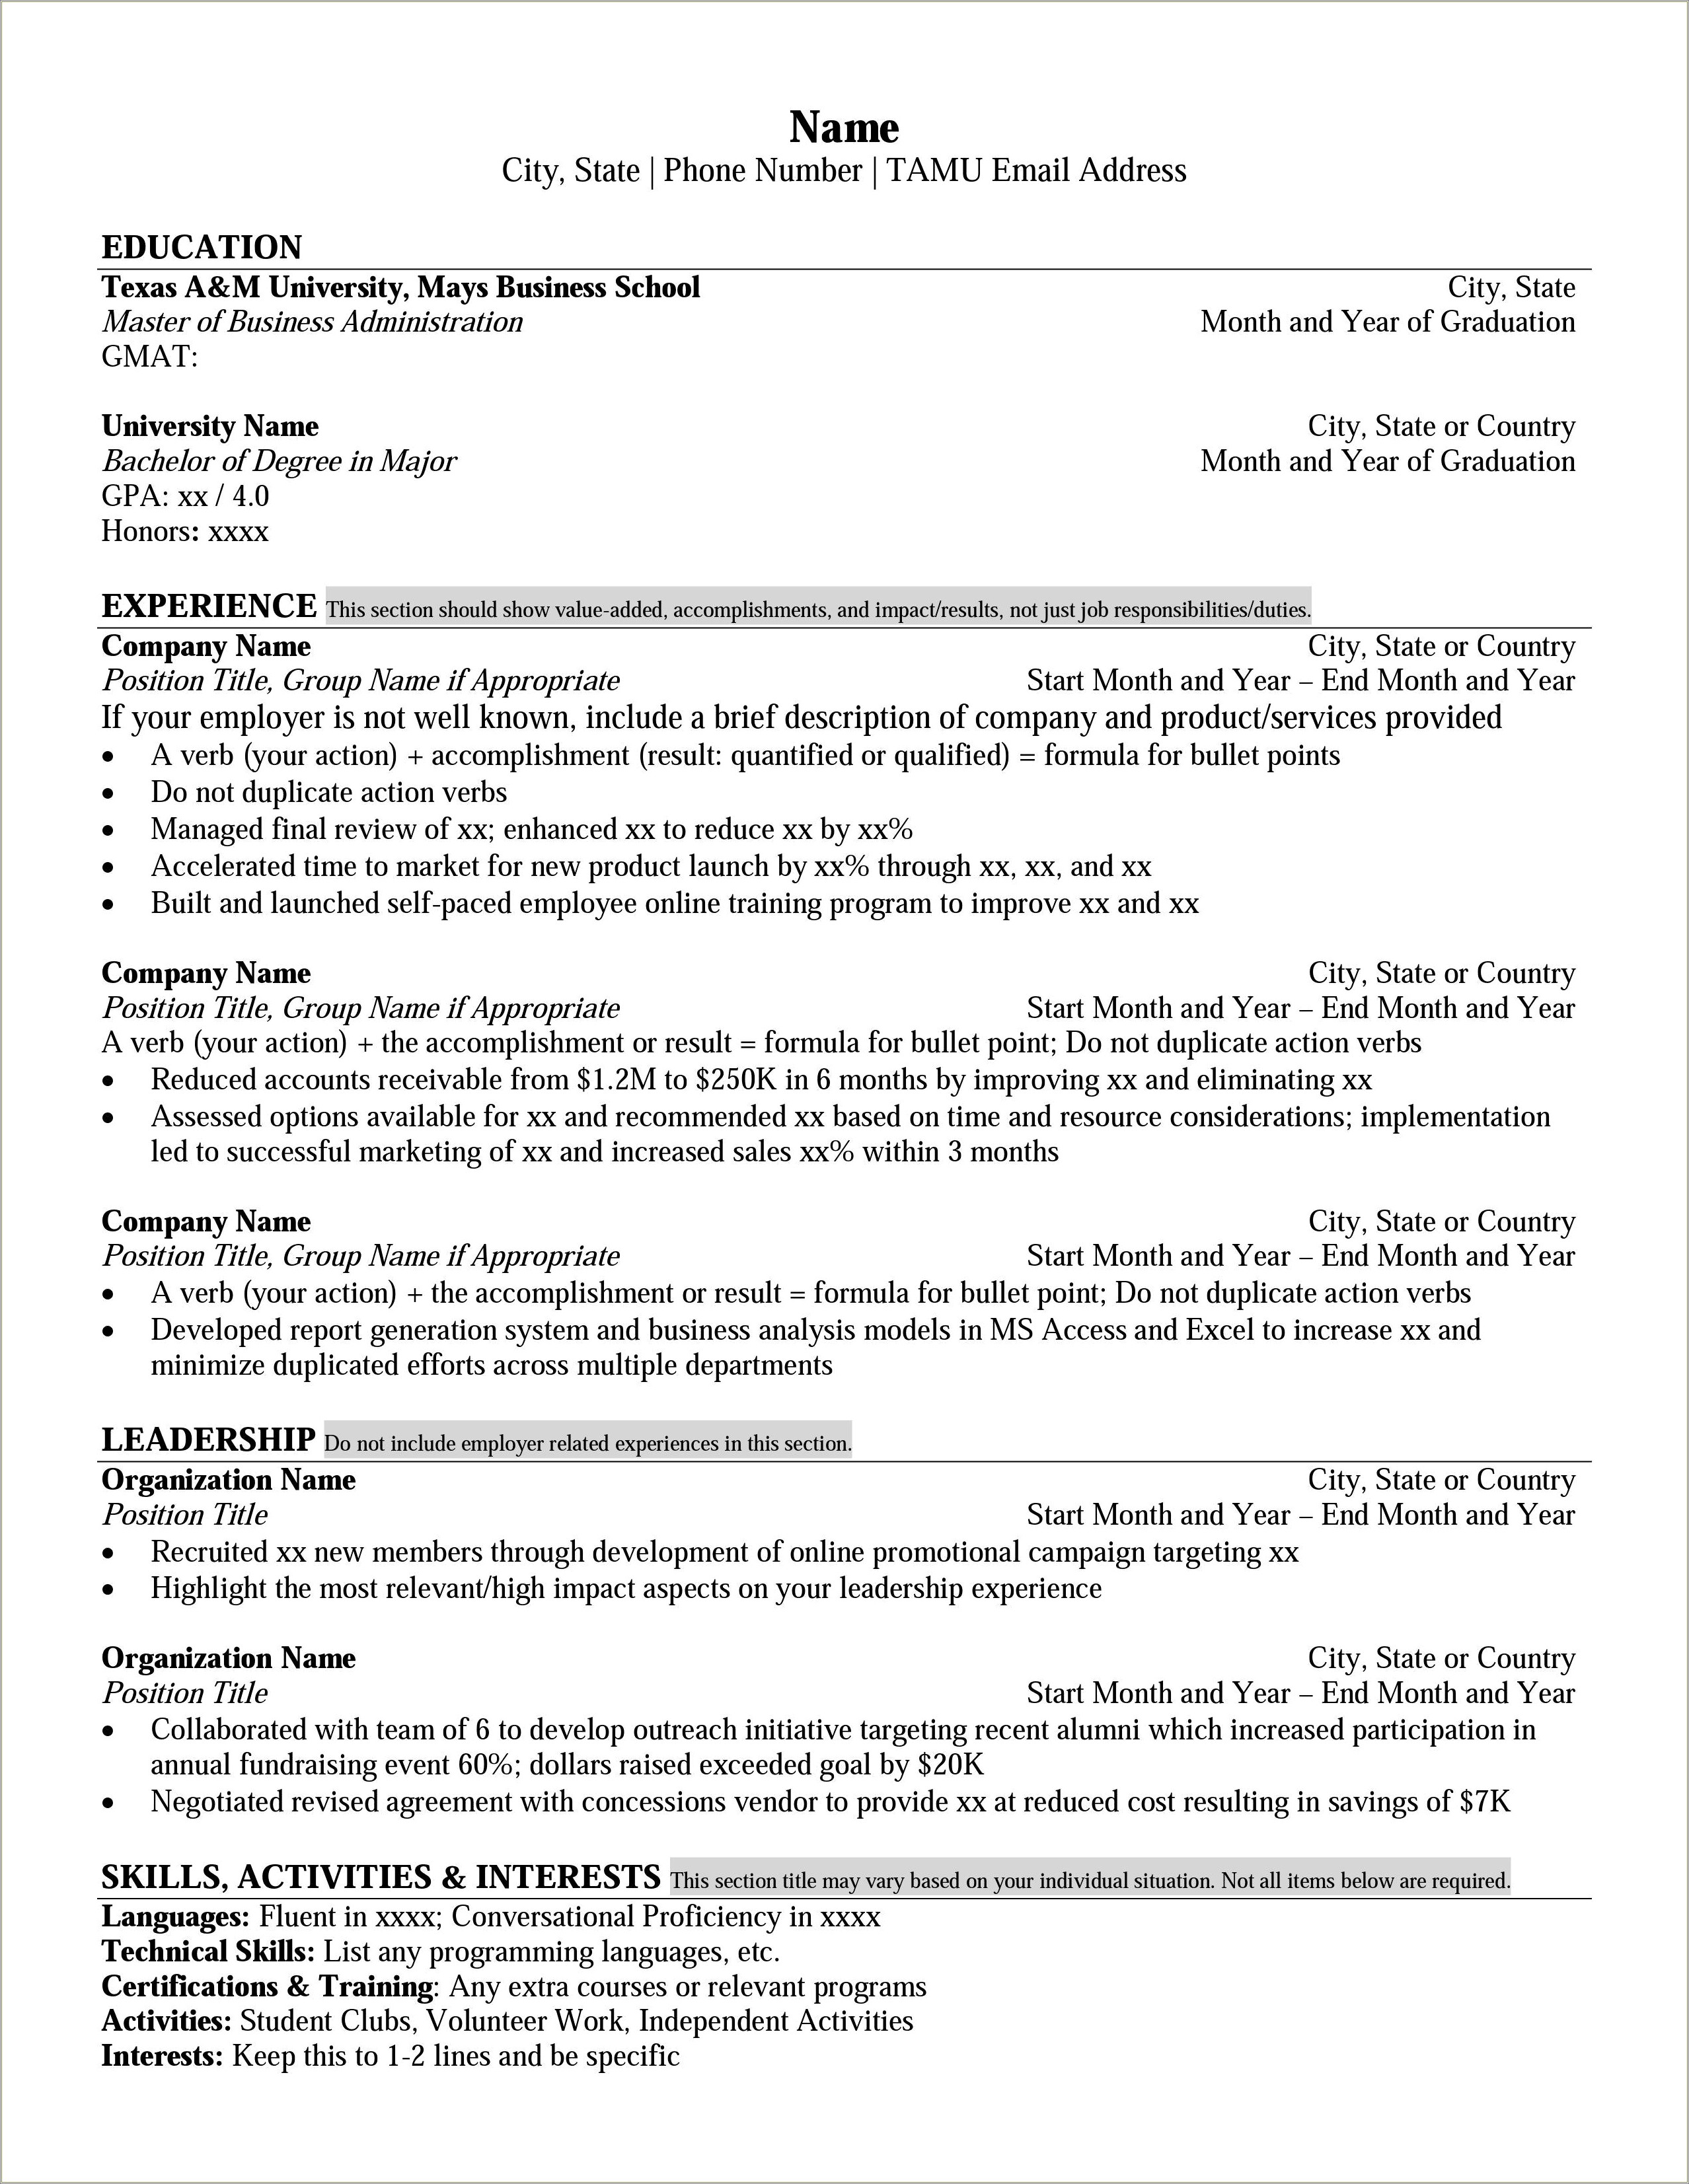 uconn-business-school-resume-example-resume-example-gallery